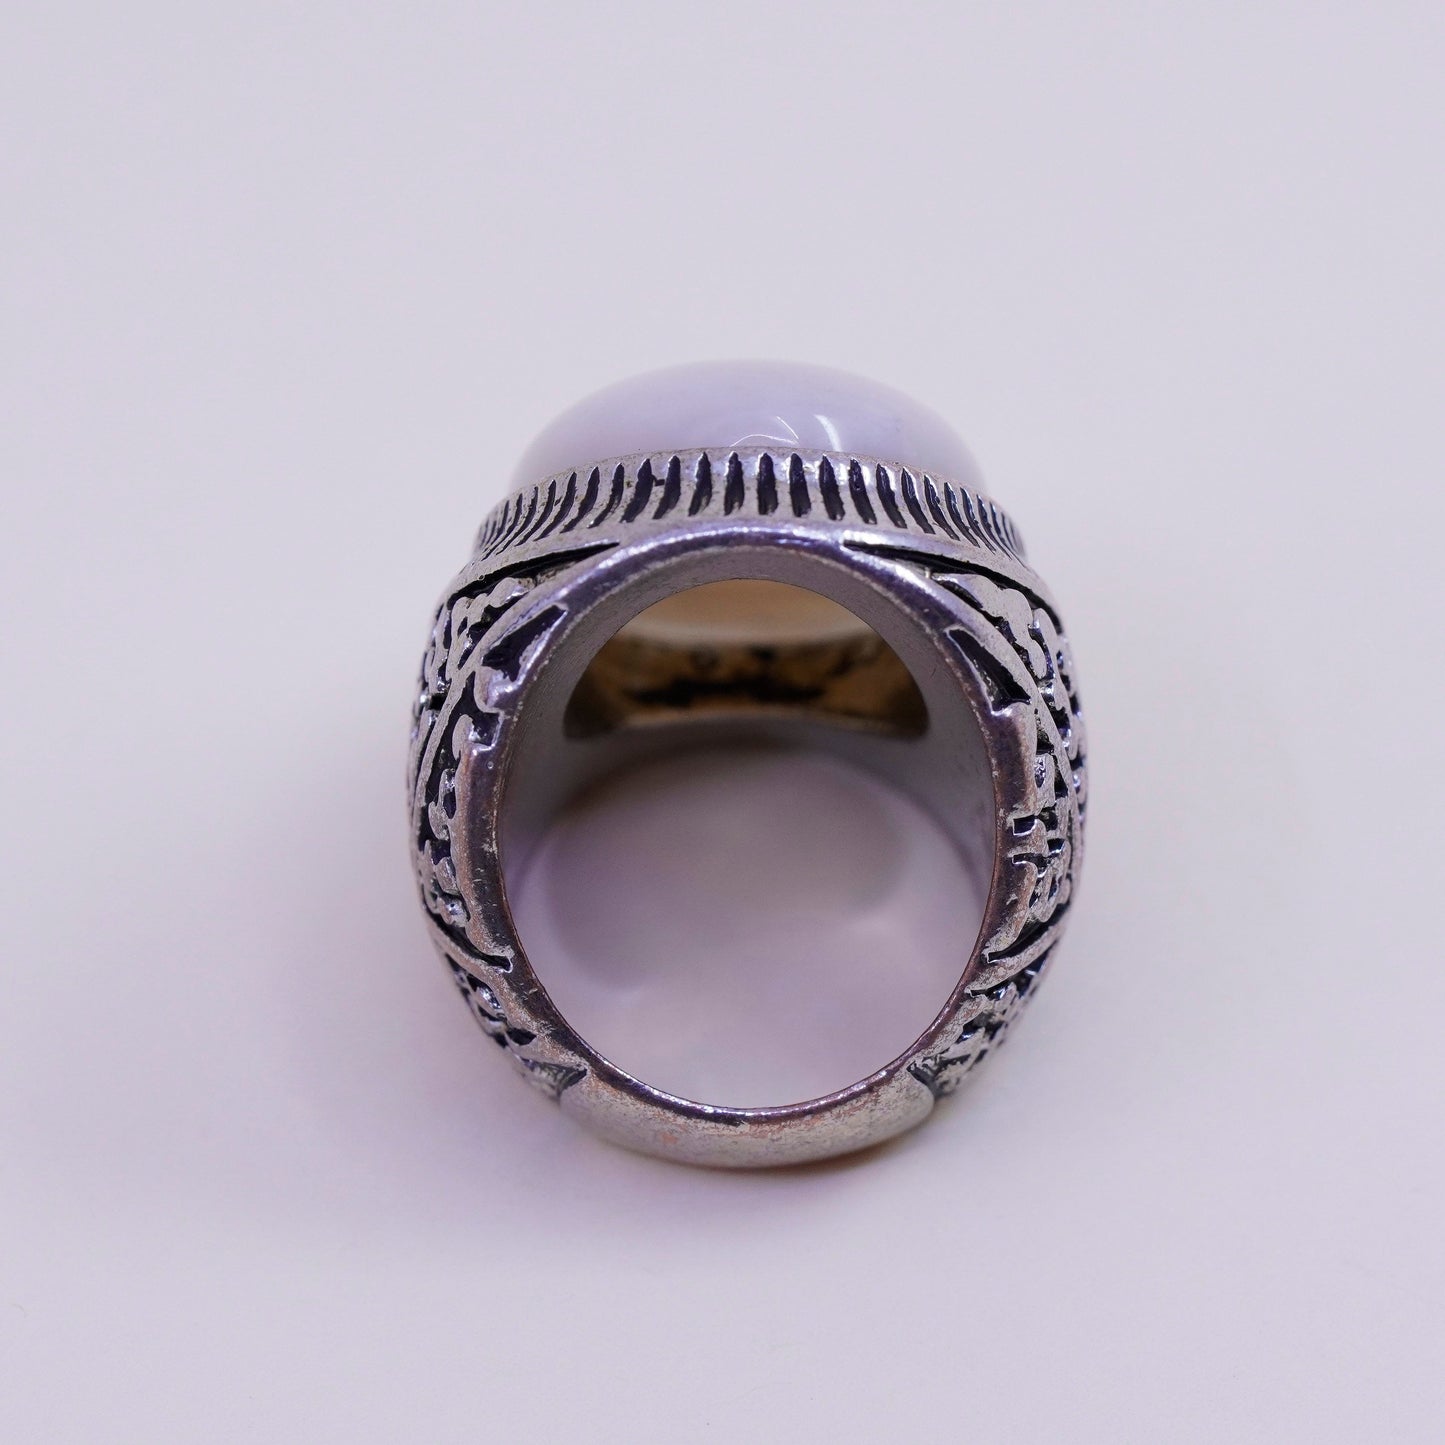 Size 7, vintage modern silver tone ring w/ moonstone